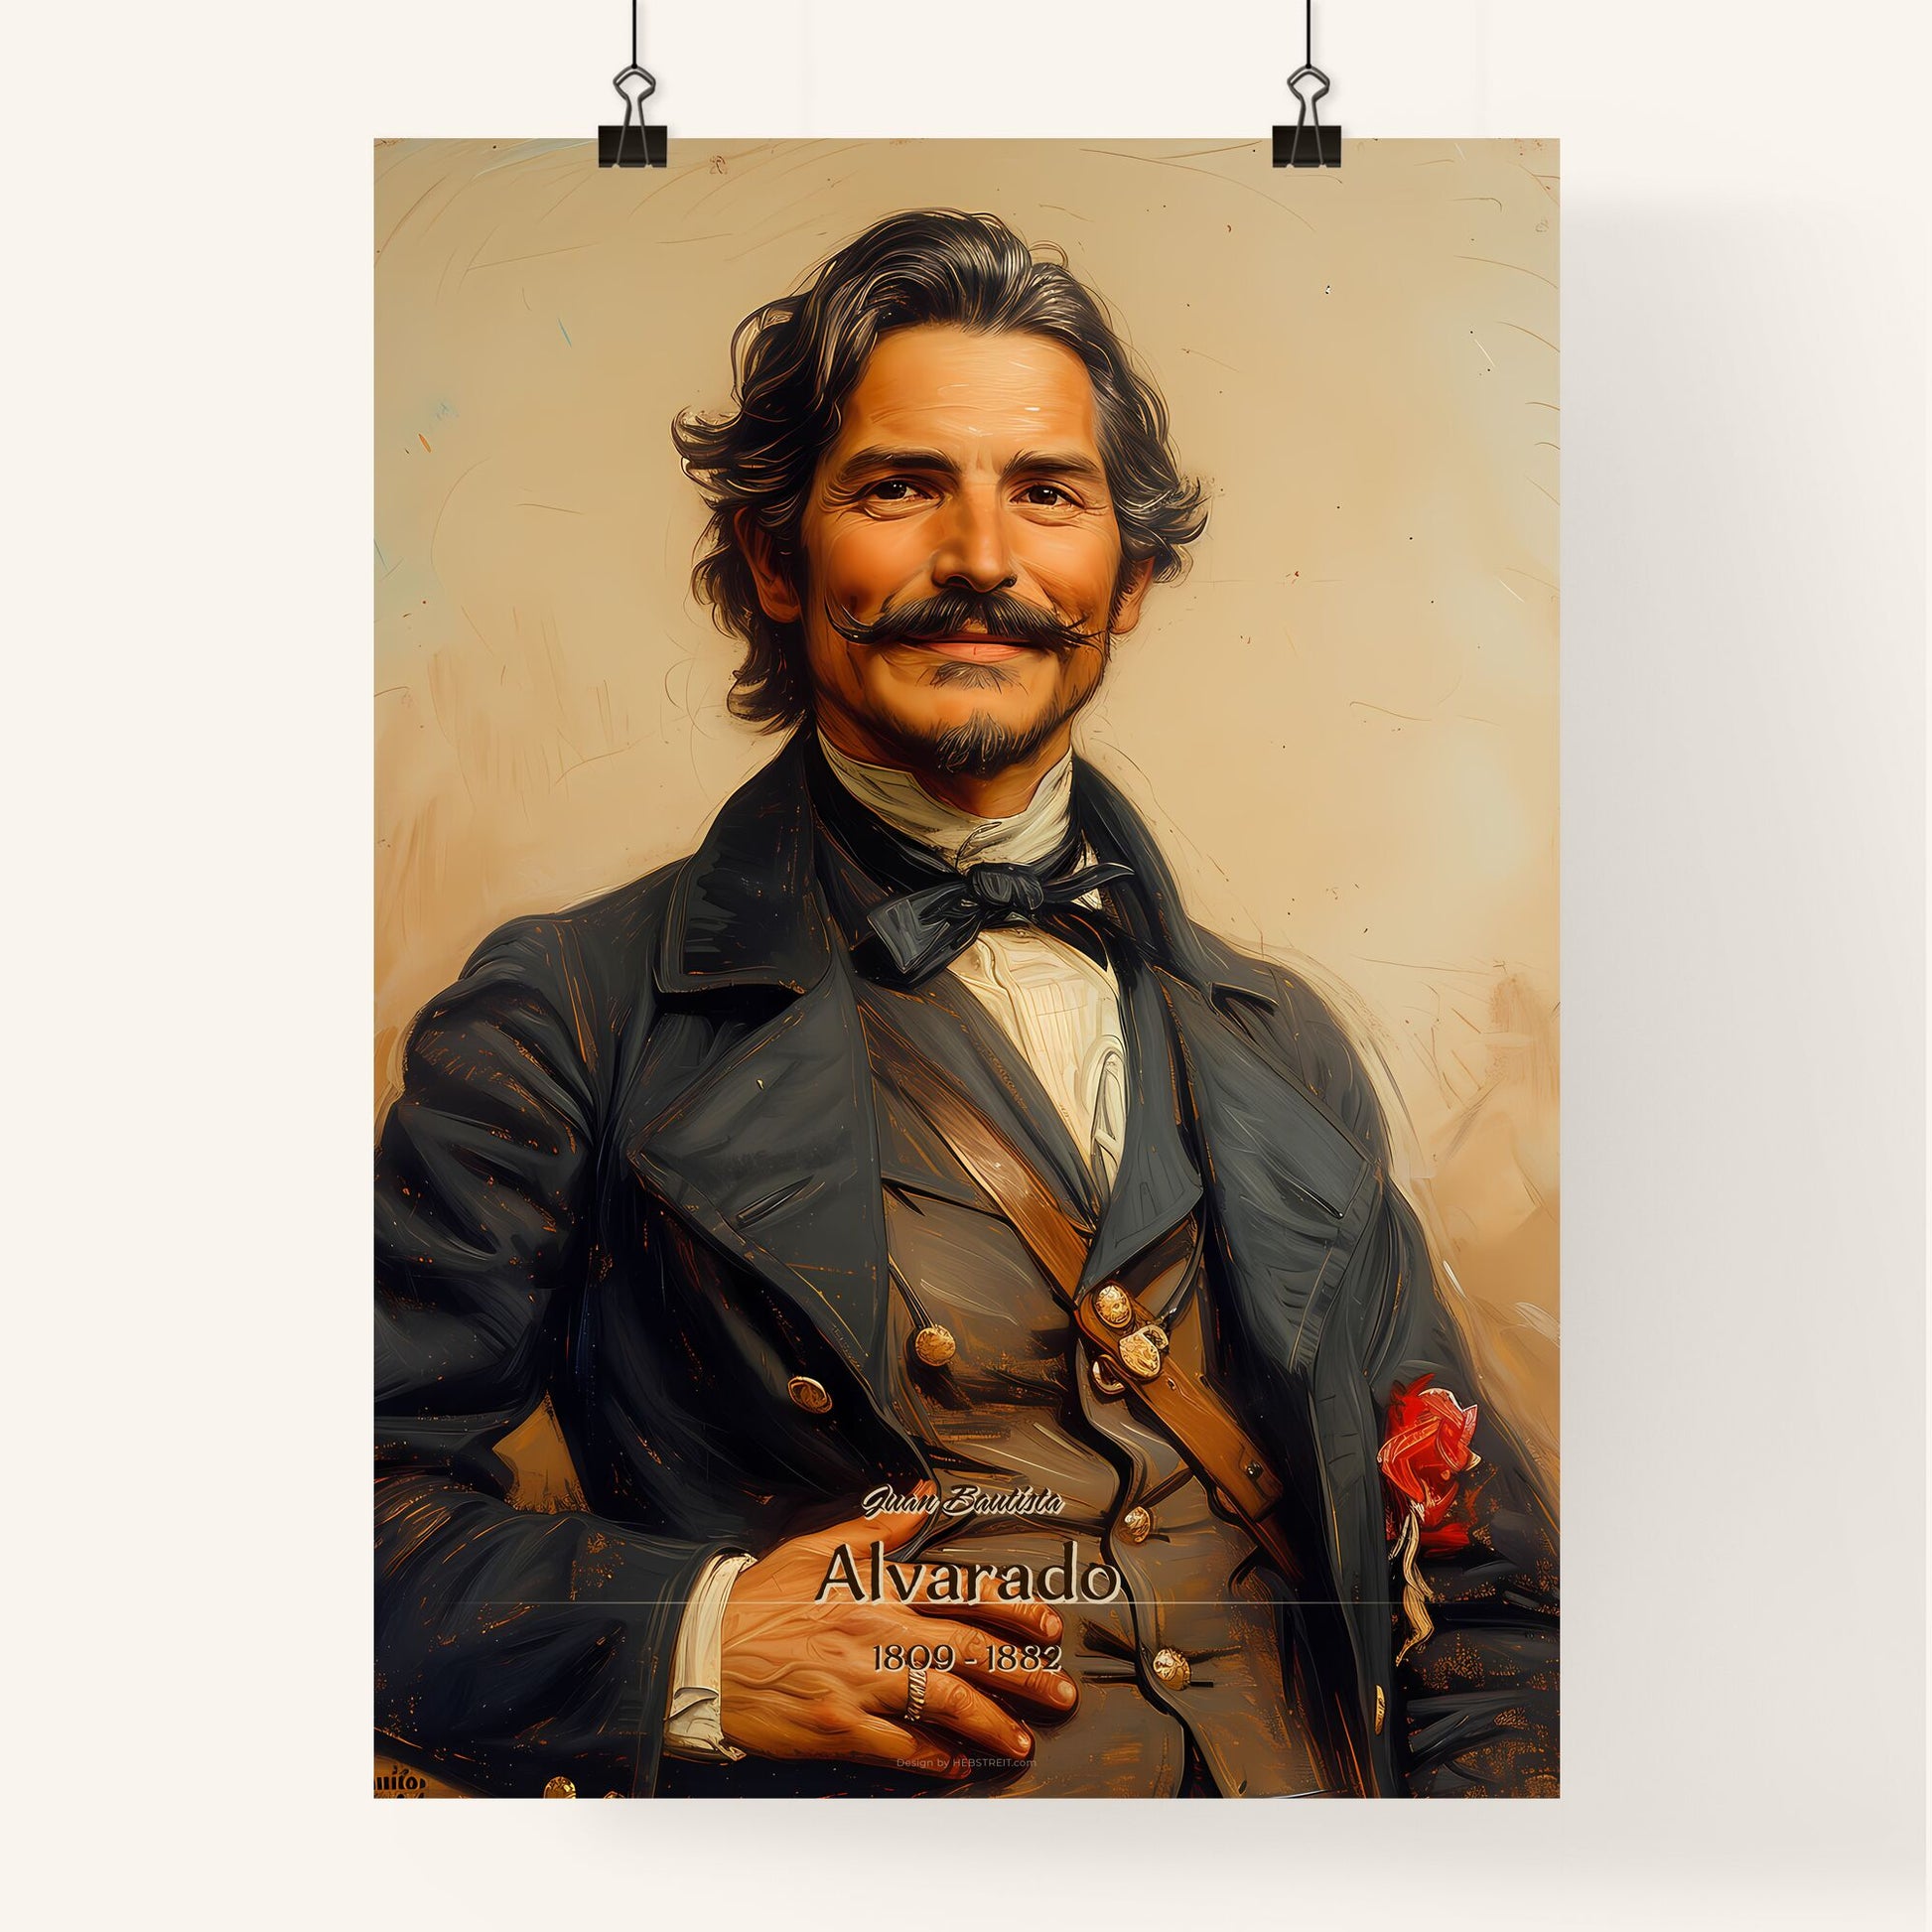 Juan Bautista, Alvarado, 1809 - 1882, A Poster of a man with a mustache and a suit Default Title